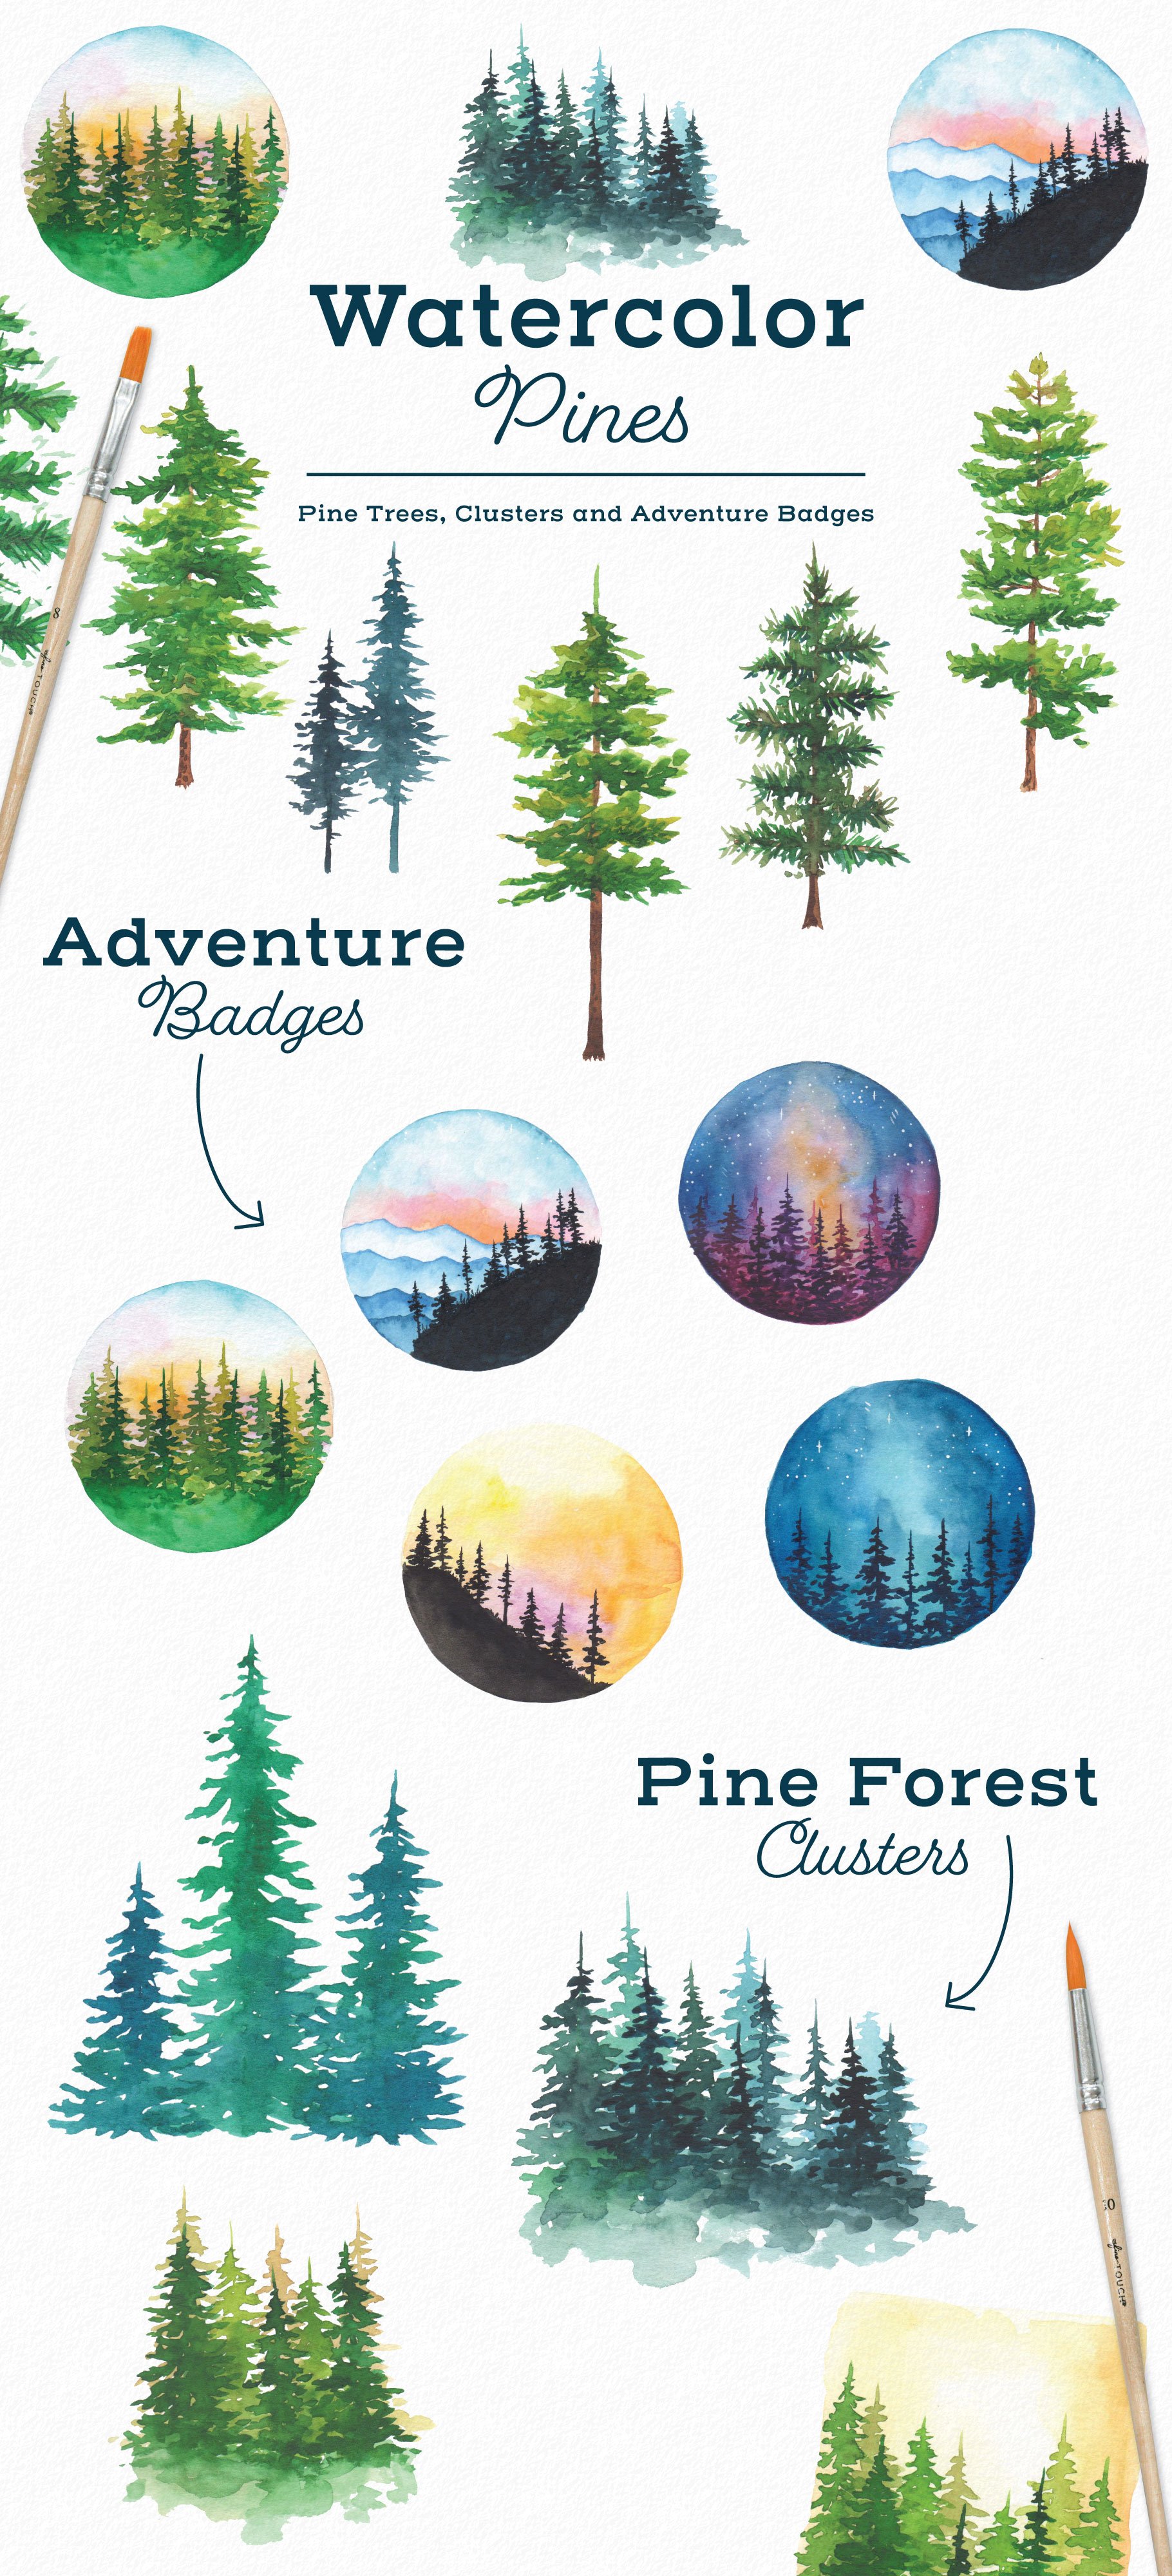 Watercolor Pine Tree Elements cover image.